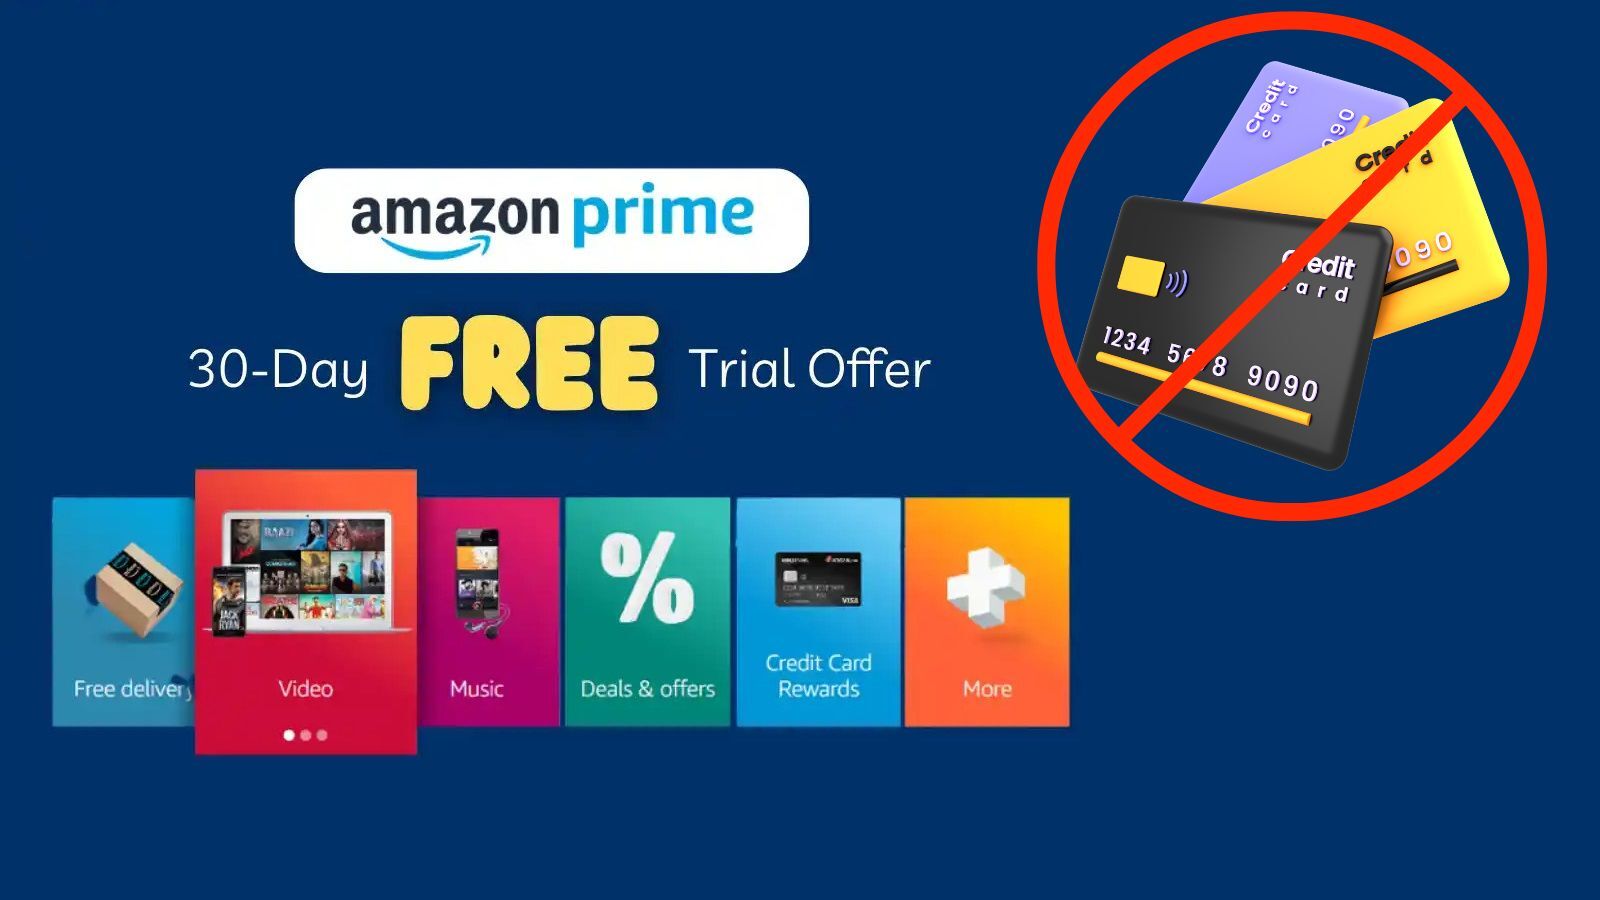 Amazon Prime Free Trial without Credit Card (Here Are the Steps to Get